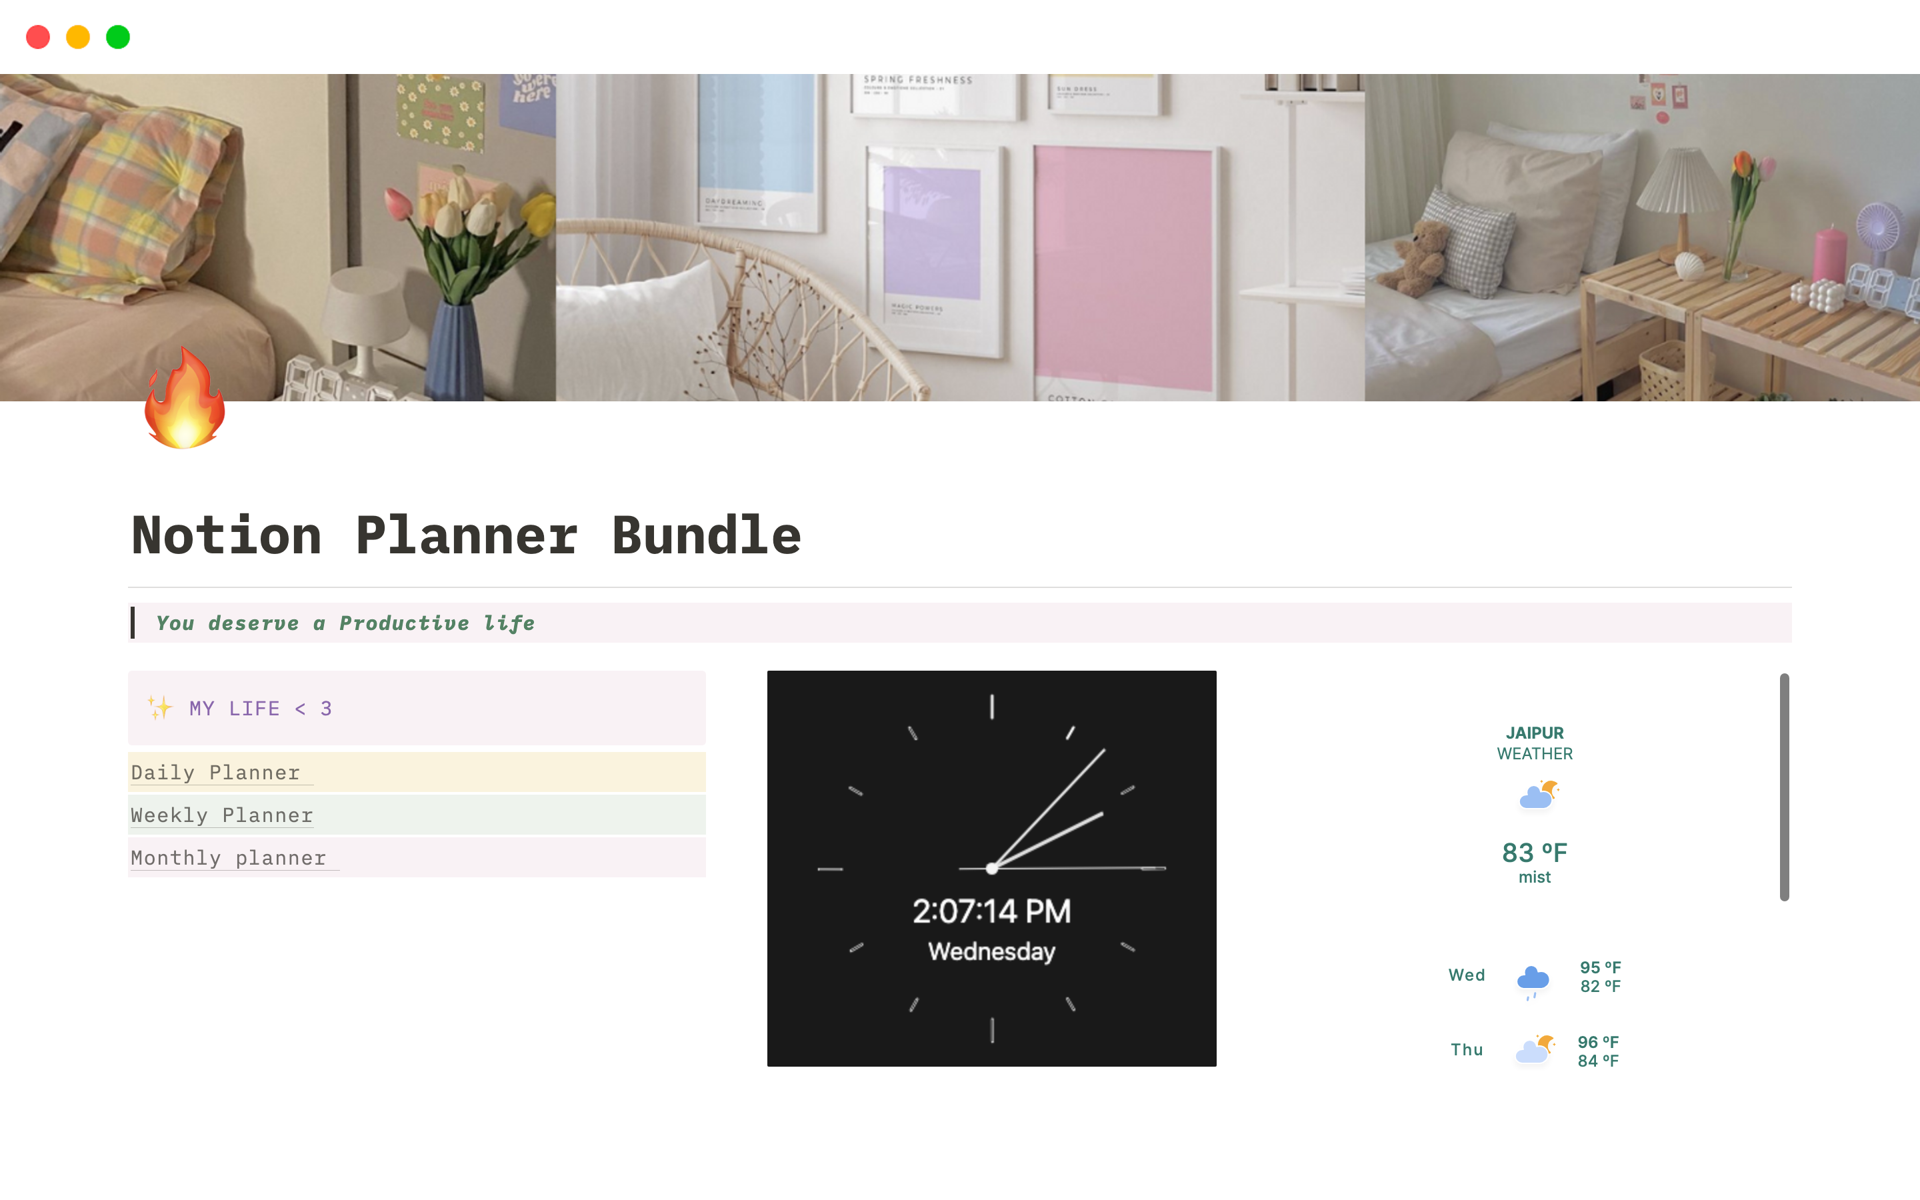 You'll get 3 separate dashboards that contain daily, weekly, and monthly planners. 

